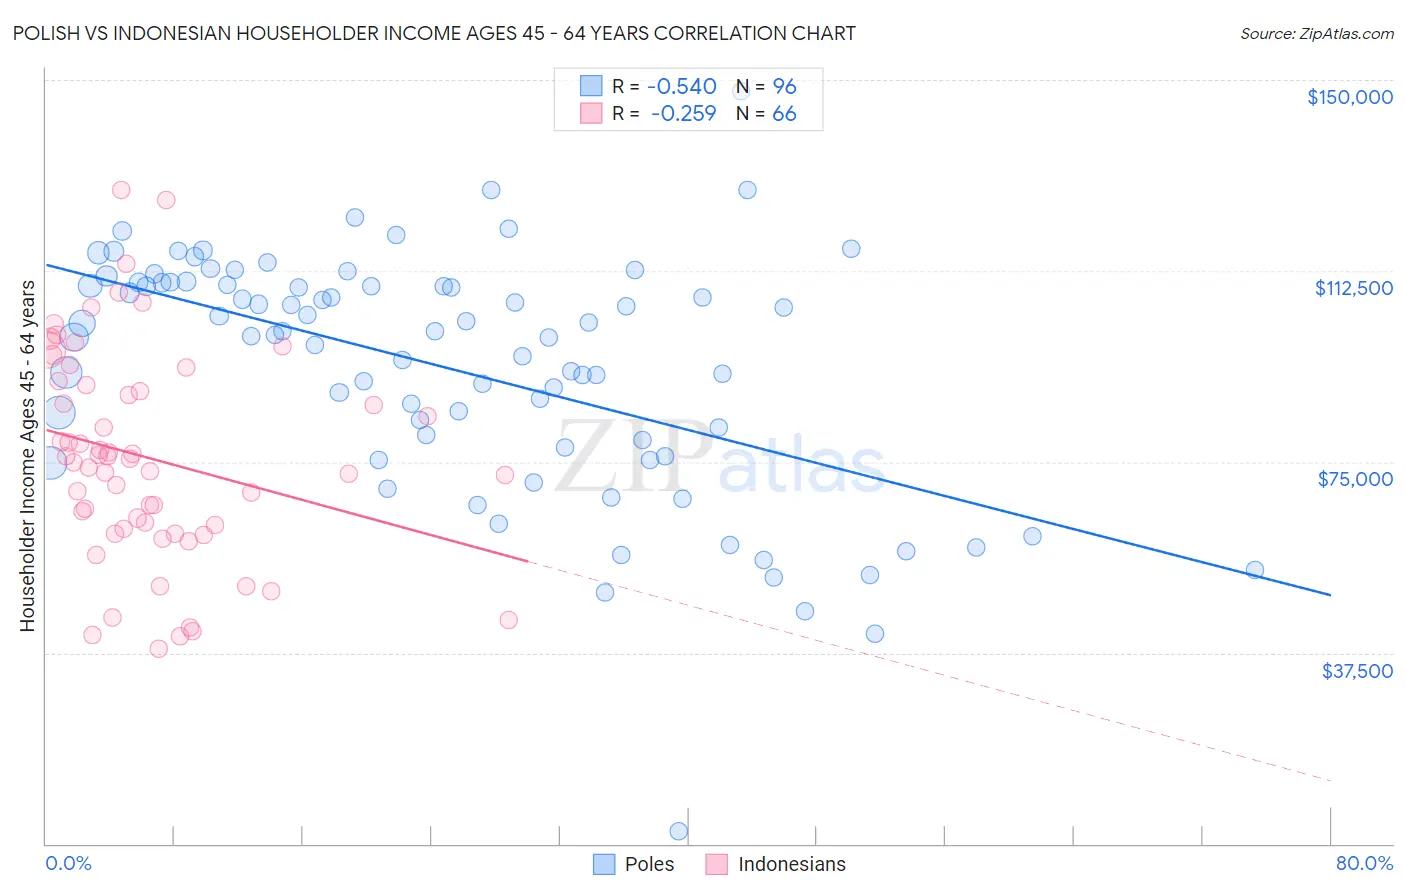 Polish vs Indonesian Householder Income Ages 45 - 64 years